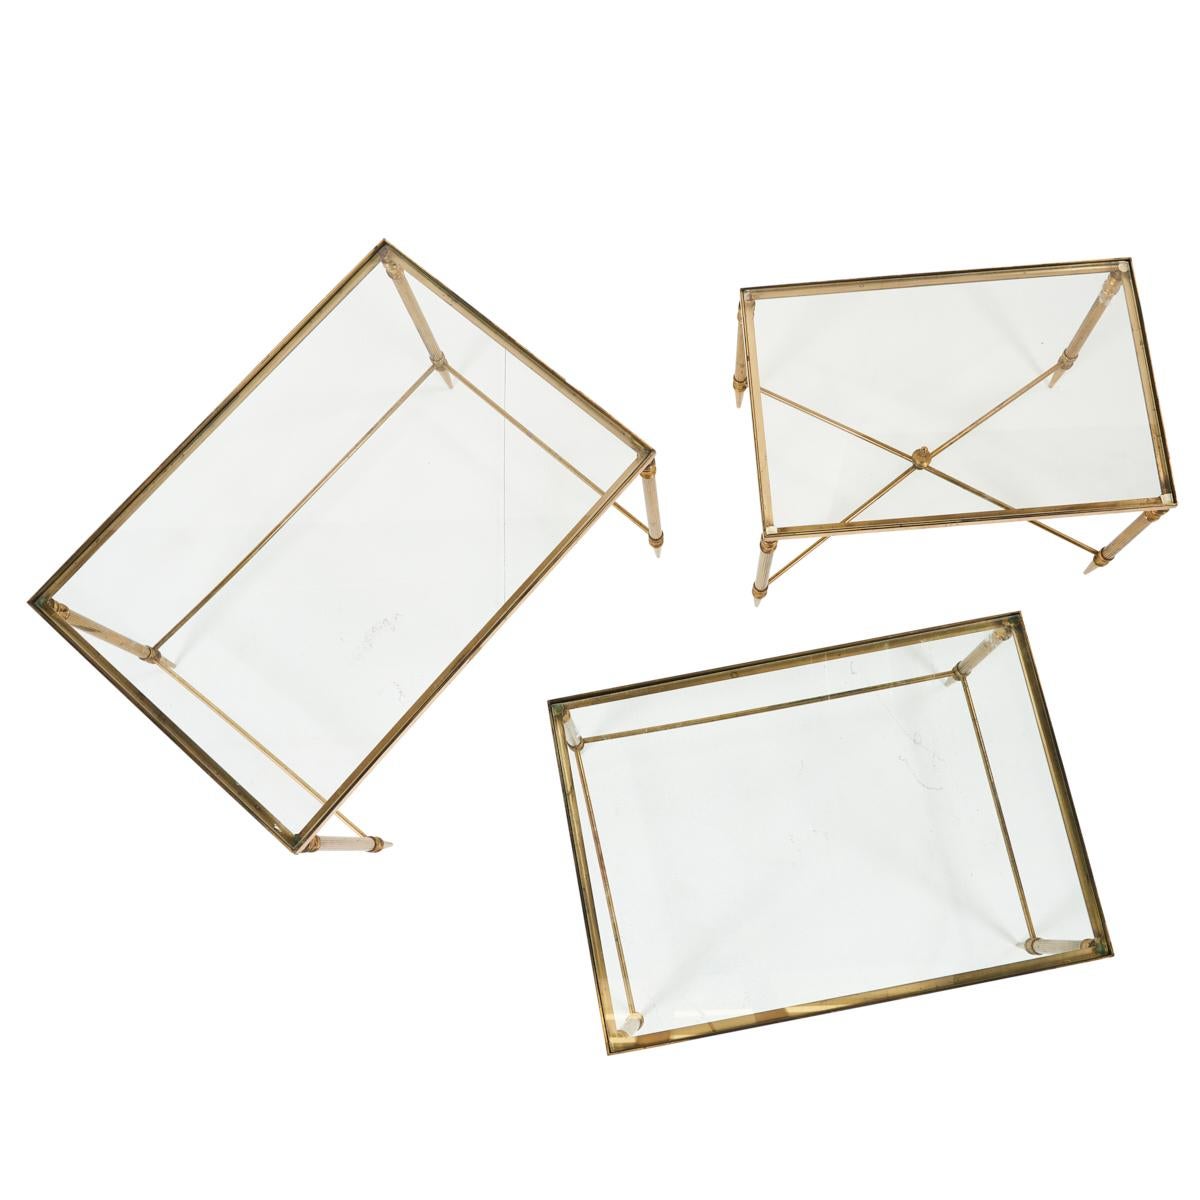 A wonderful vintage find from France, this set of nesting tables is timeless, elegant and infinitely useful. Their delicate silhouettes make them remarkably versatile and easy to place in any room that calls for a flash of brass, glass and glamour. 
